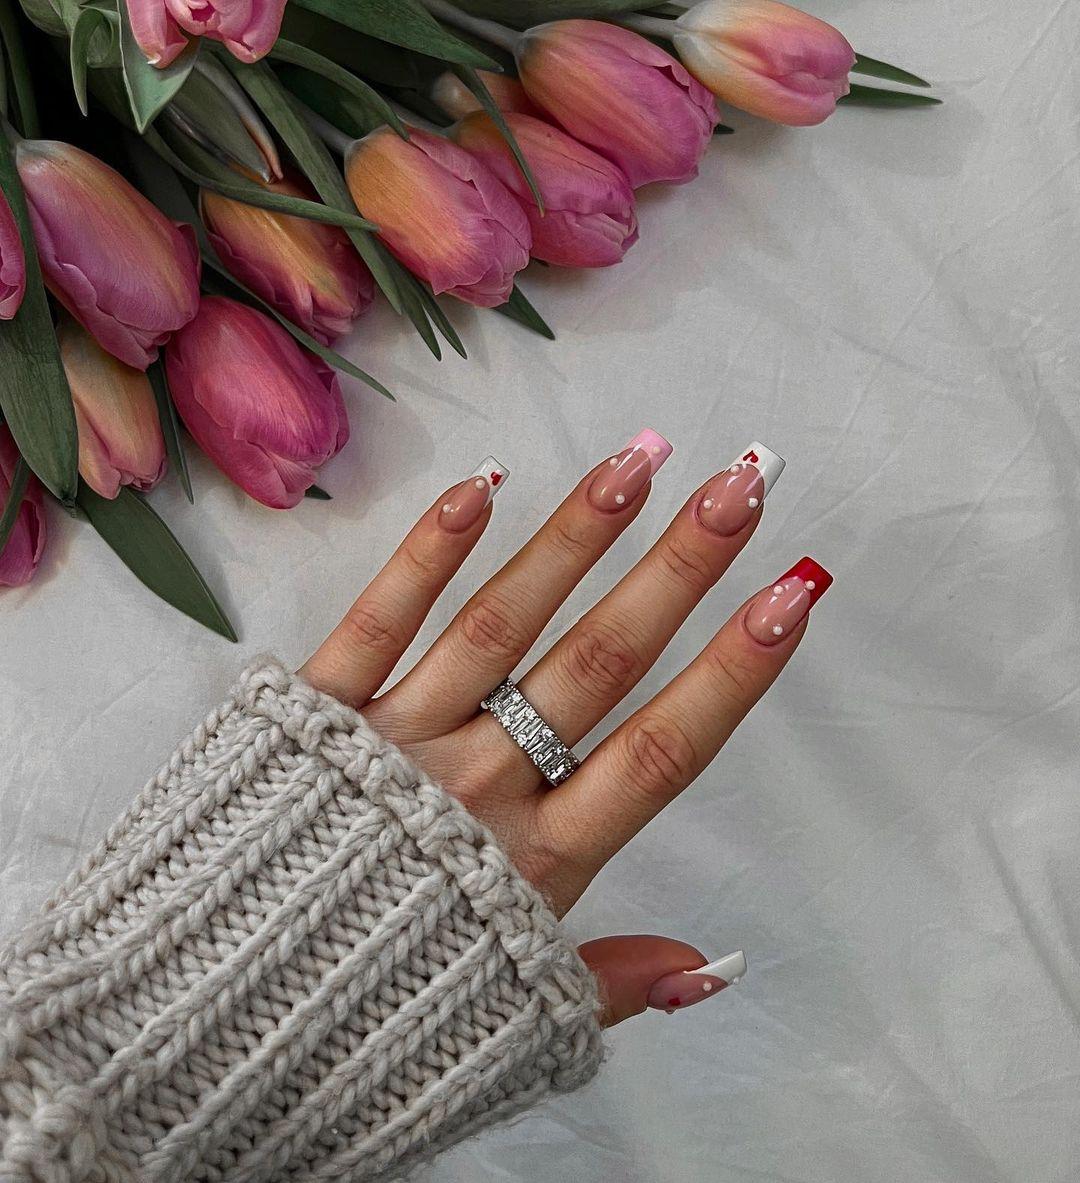 class="content__text"
 sweetheart💕🌸

 #vday #vdaynails #nailsart #nailsinspiration #flowerslovers #frenchmanicure 
 